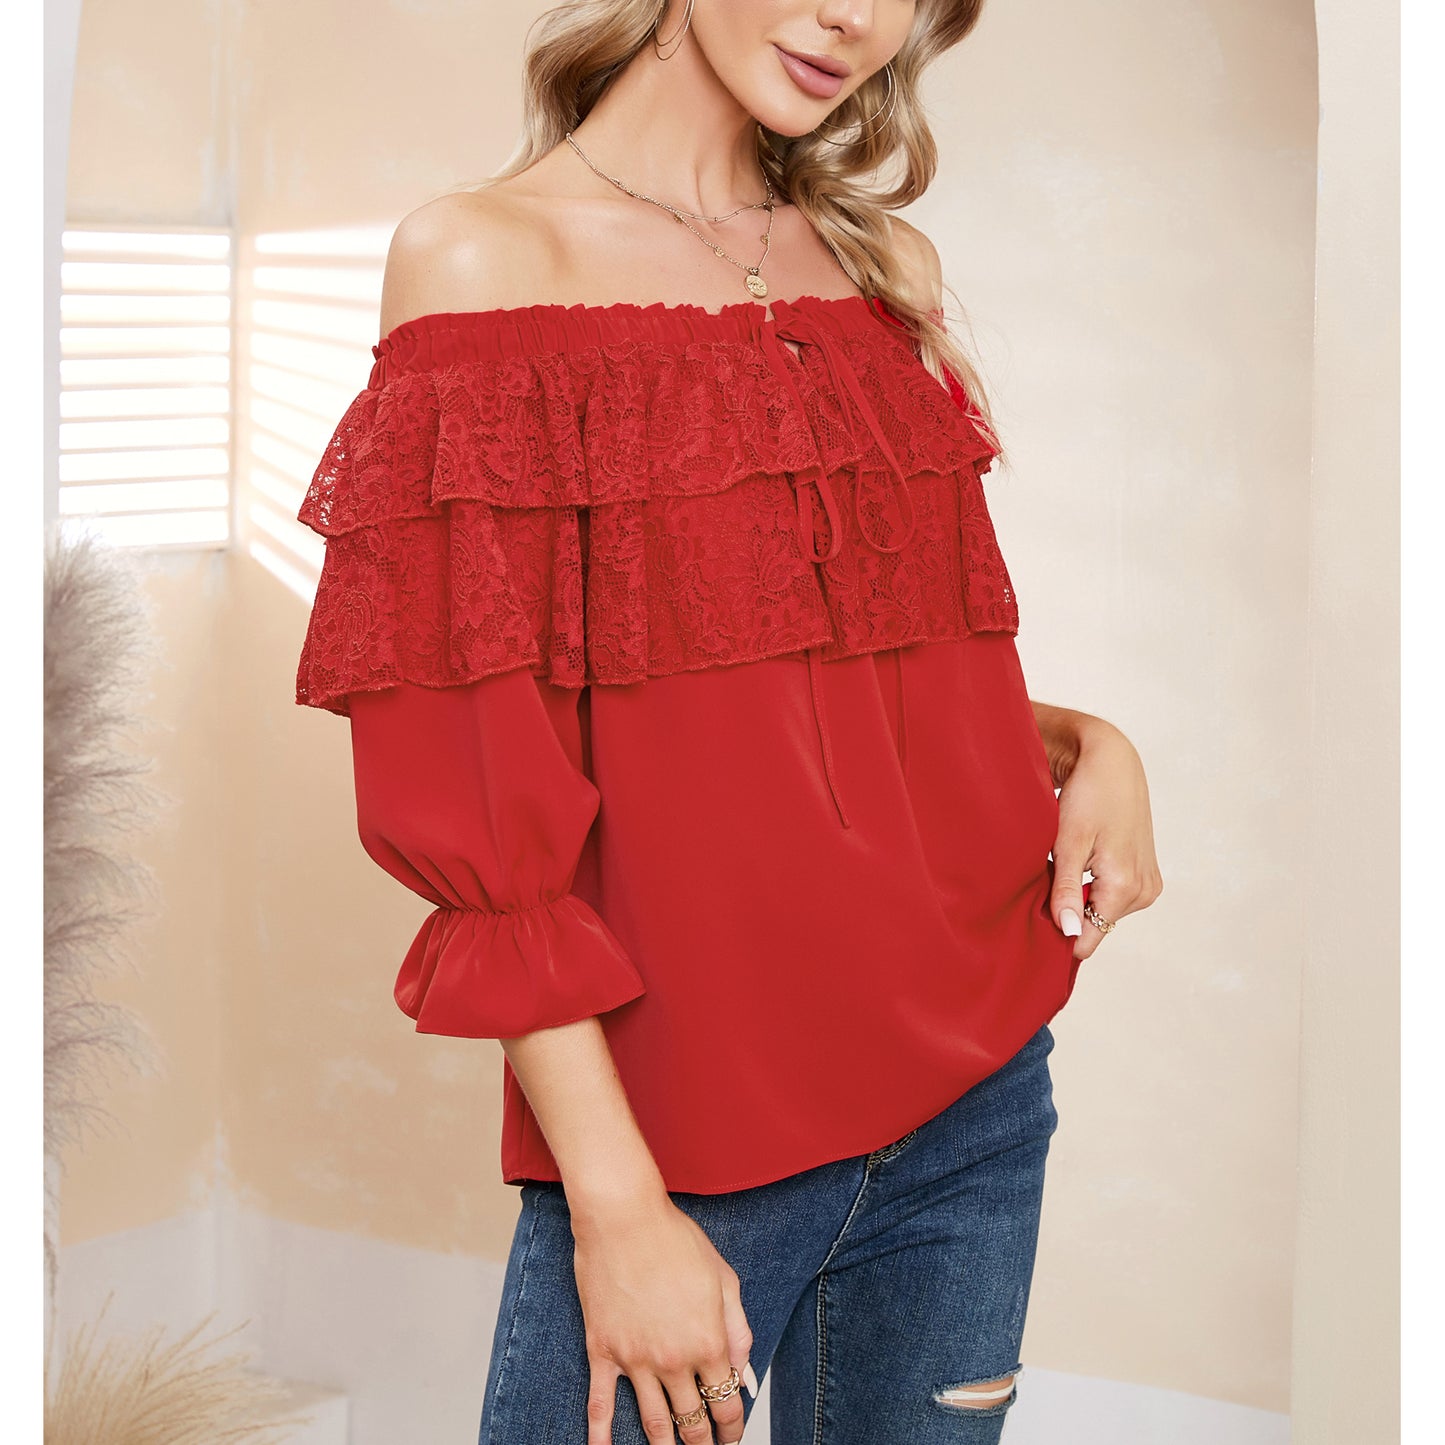 Byinns Women's Off The Shoulder Layered Ruffle Lace Tops Long Puff Sleeve Blouses Flowy Party Dressy Tops